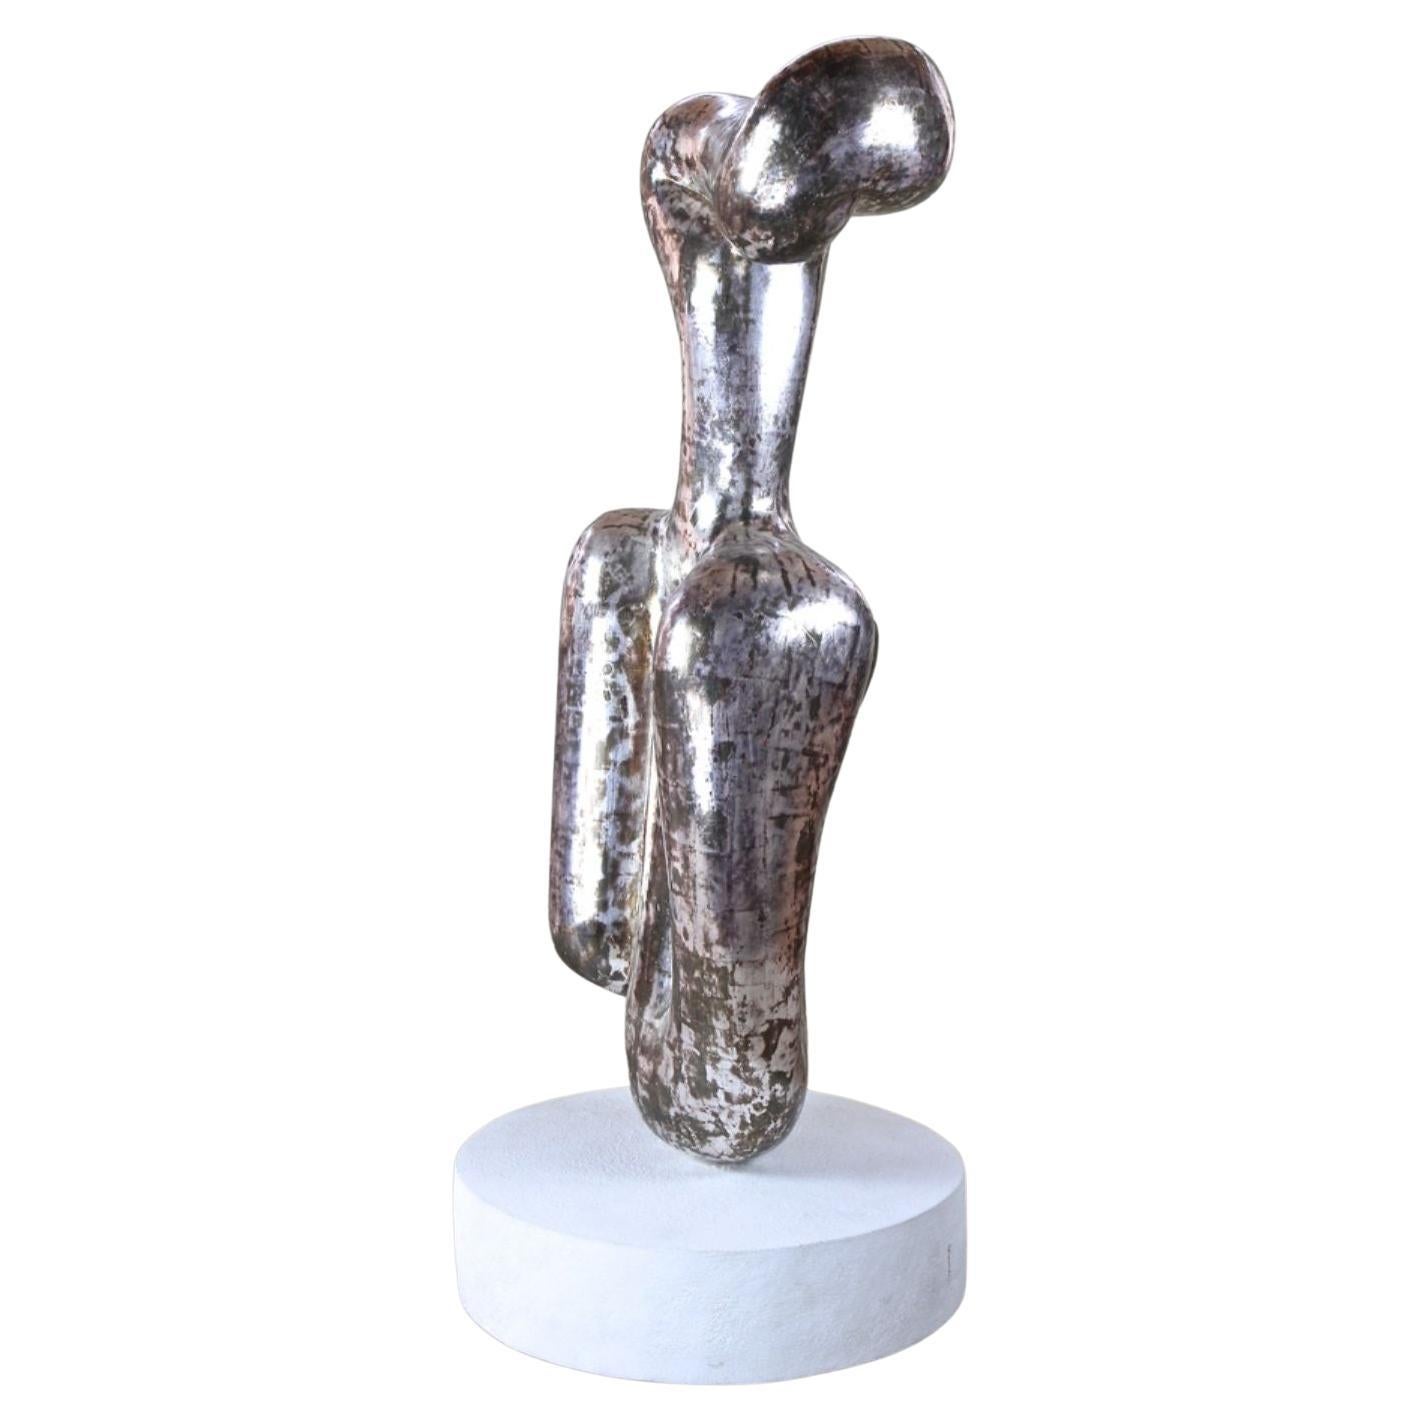 Abstract Contemporary Silvered Sculpture by M. Treml, Handcarved, Austria 2018 For Sale